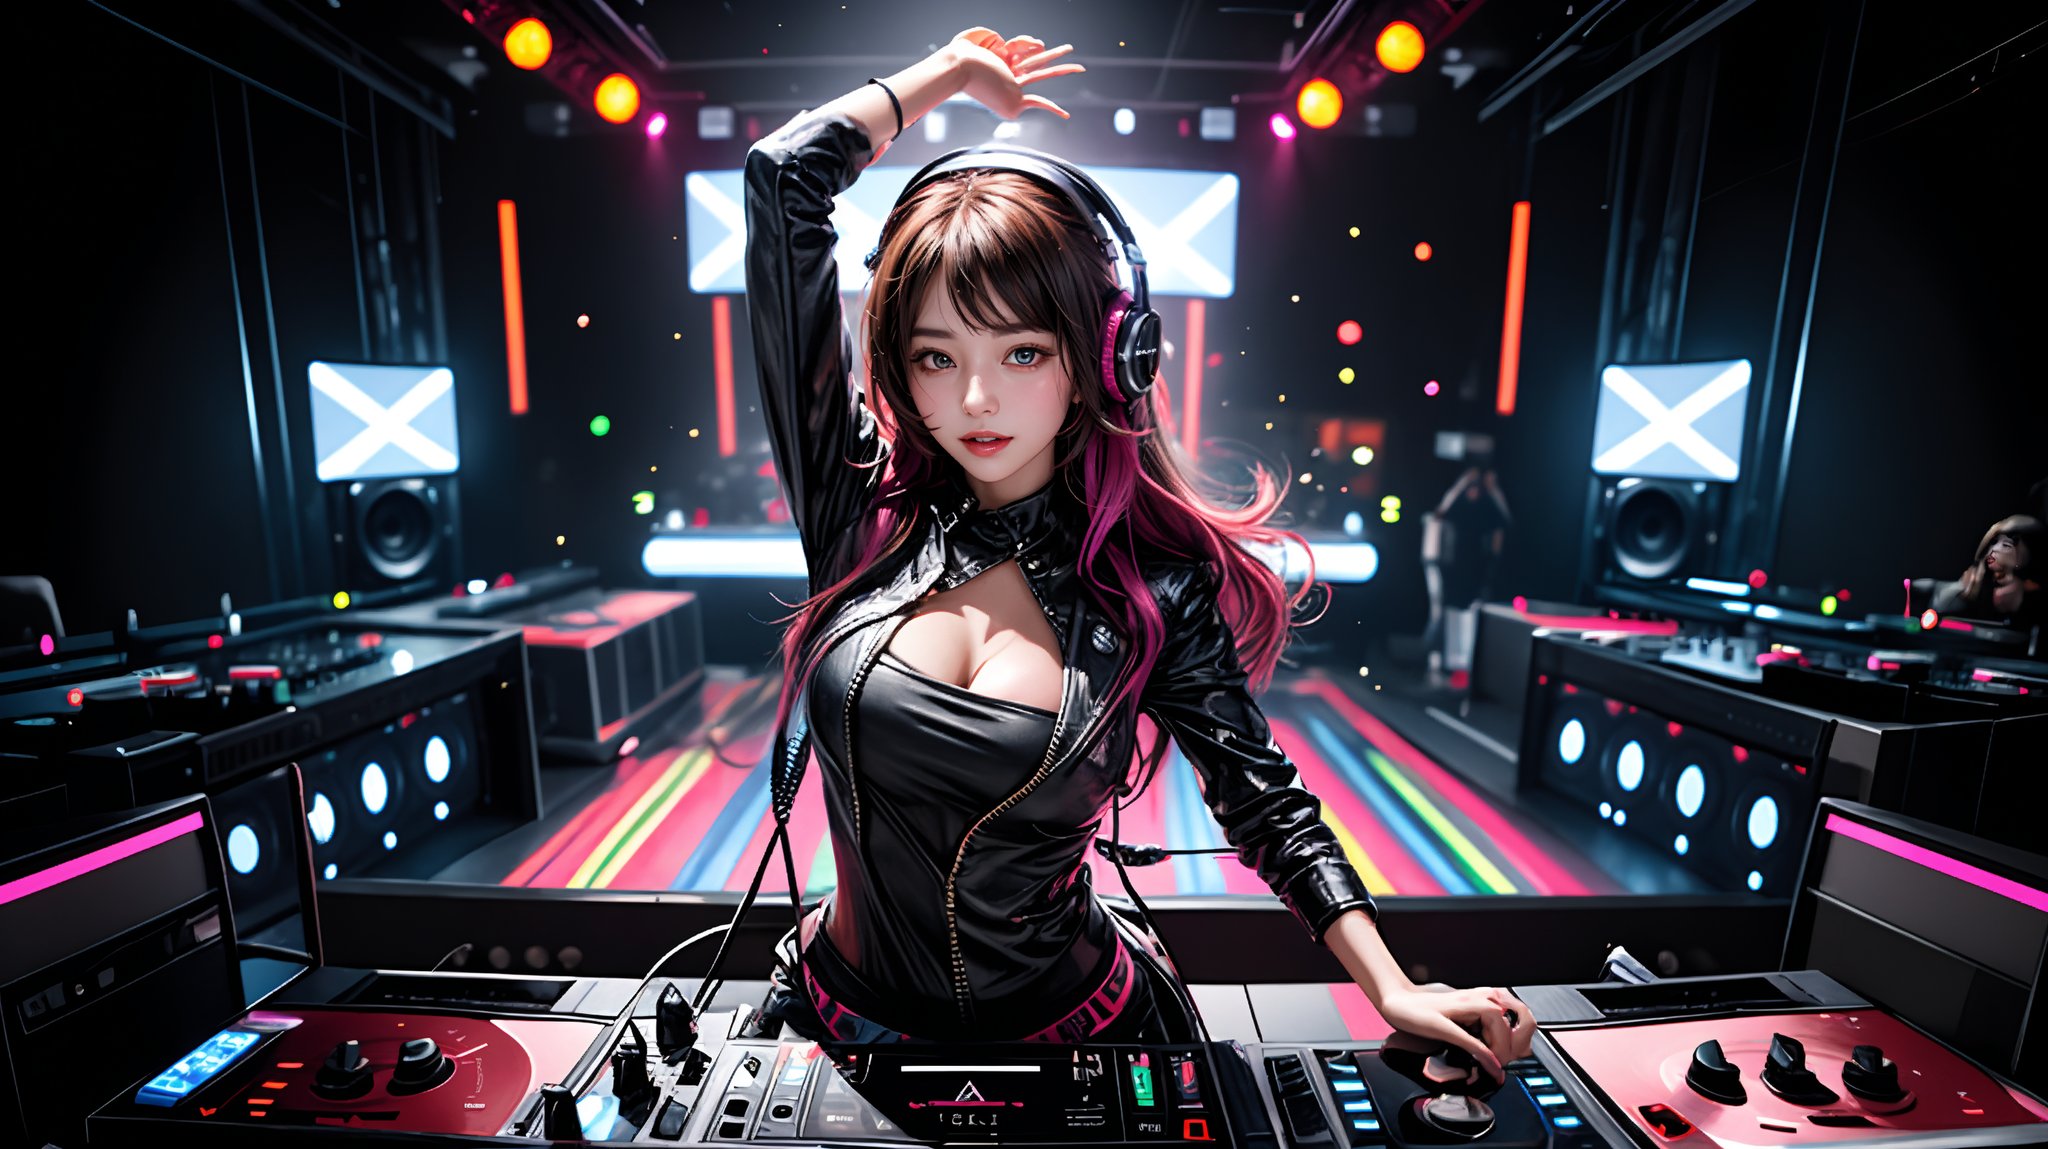 A dynamic nightclub scene: A female DJ stands confidently next to the dance floor, surrounded by flashing lights and a sea of partygoers dancing in unison. She's focused on adjusting the mix, her large headphones perched on one ear as she vibes with the music. Neon lights swirl around her, casting a colorful glow on her fashionable outfit. The LED screen behind her pulses with dynamic visuals, adding to the lively atmosphere. Vinyl records, mixers, and equipment line the DJ booth, where she effortlessly spins tracks with flexible fingers, her hair moving gently to the rhythm as a confident smile spreads across her face.